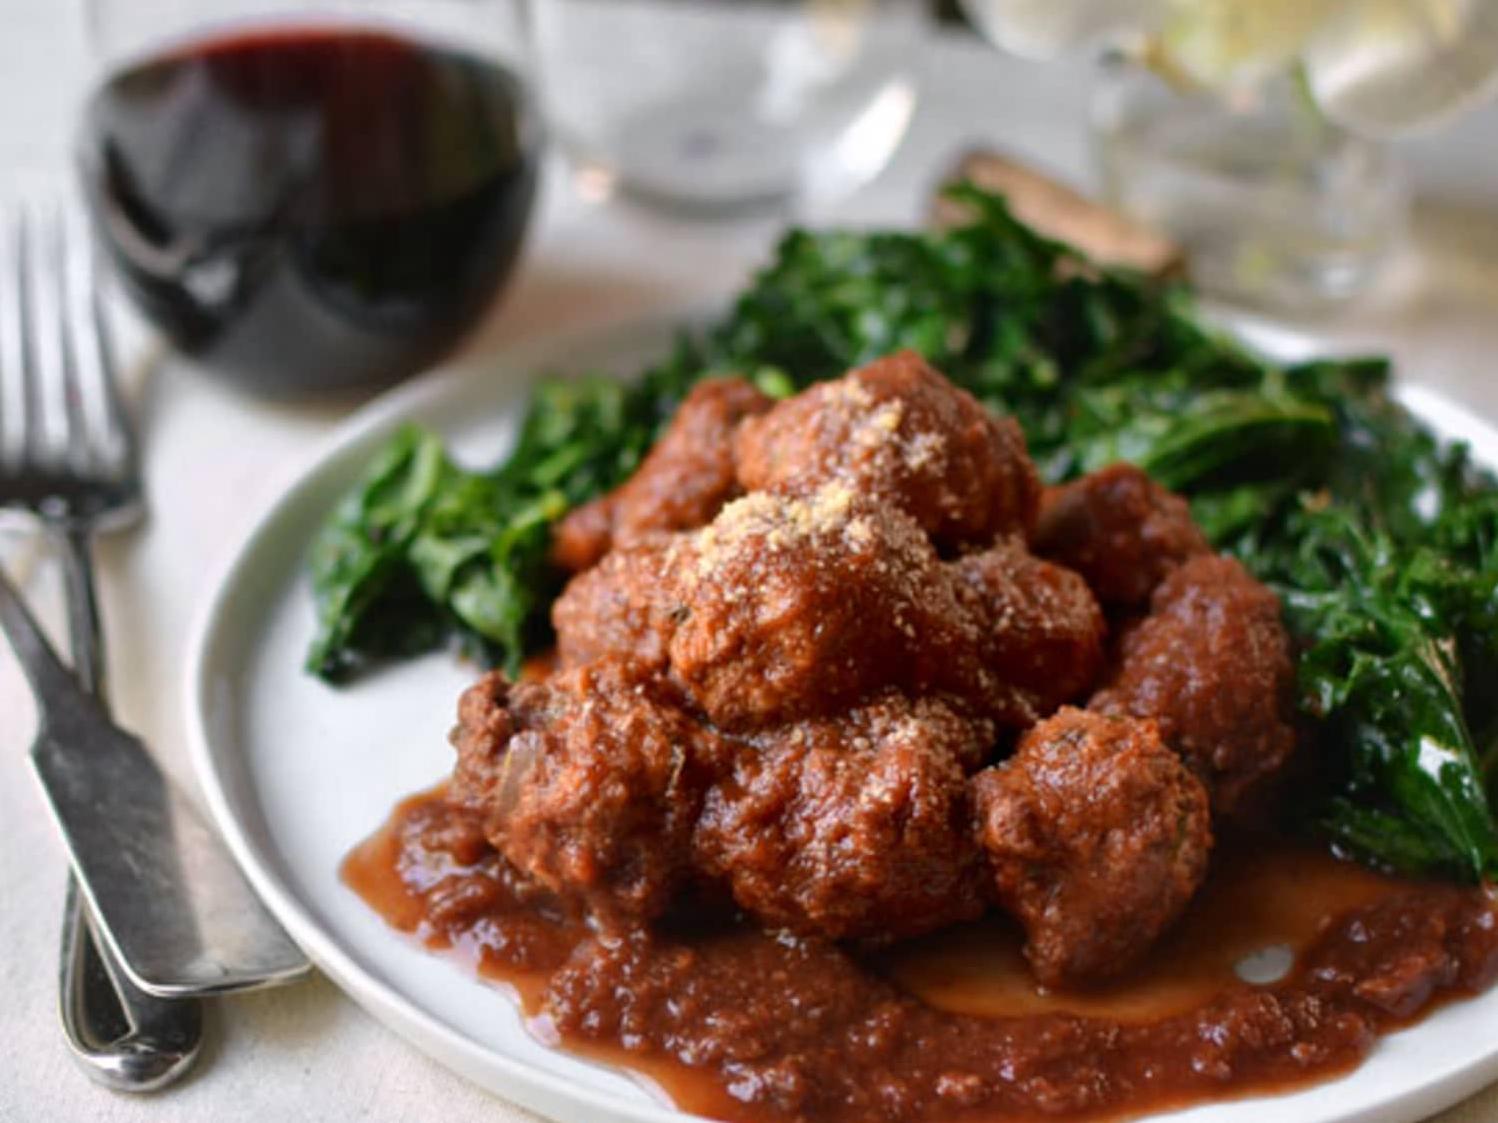  The savory tomato sauce gives these meatballs the perfect finishing touch.